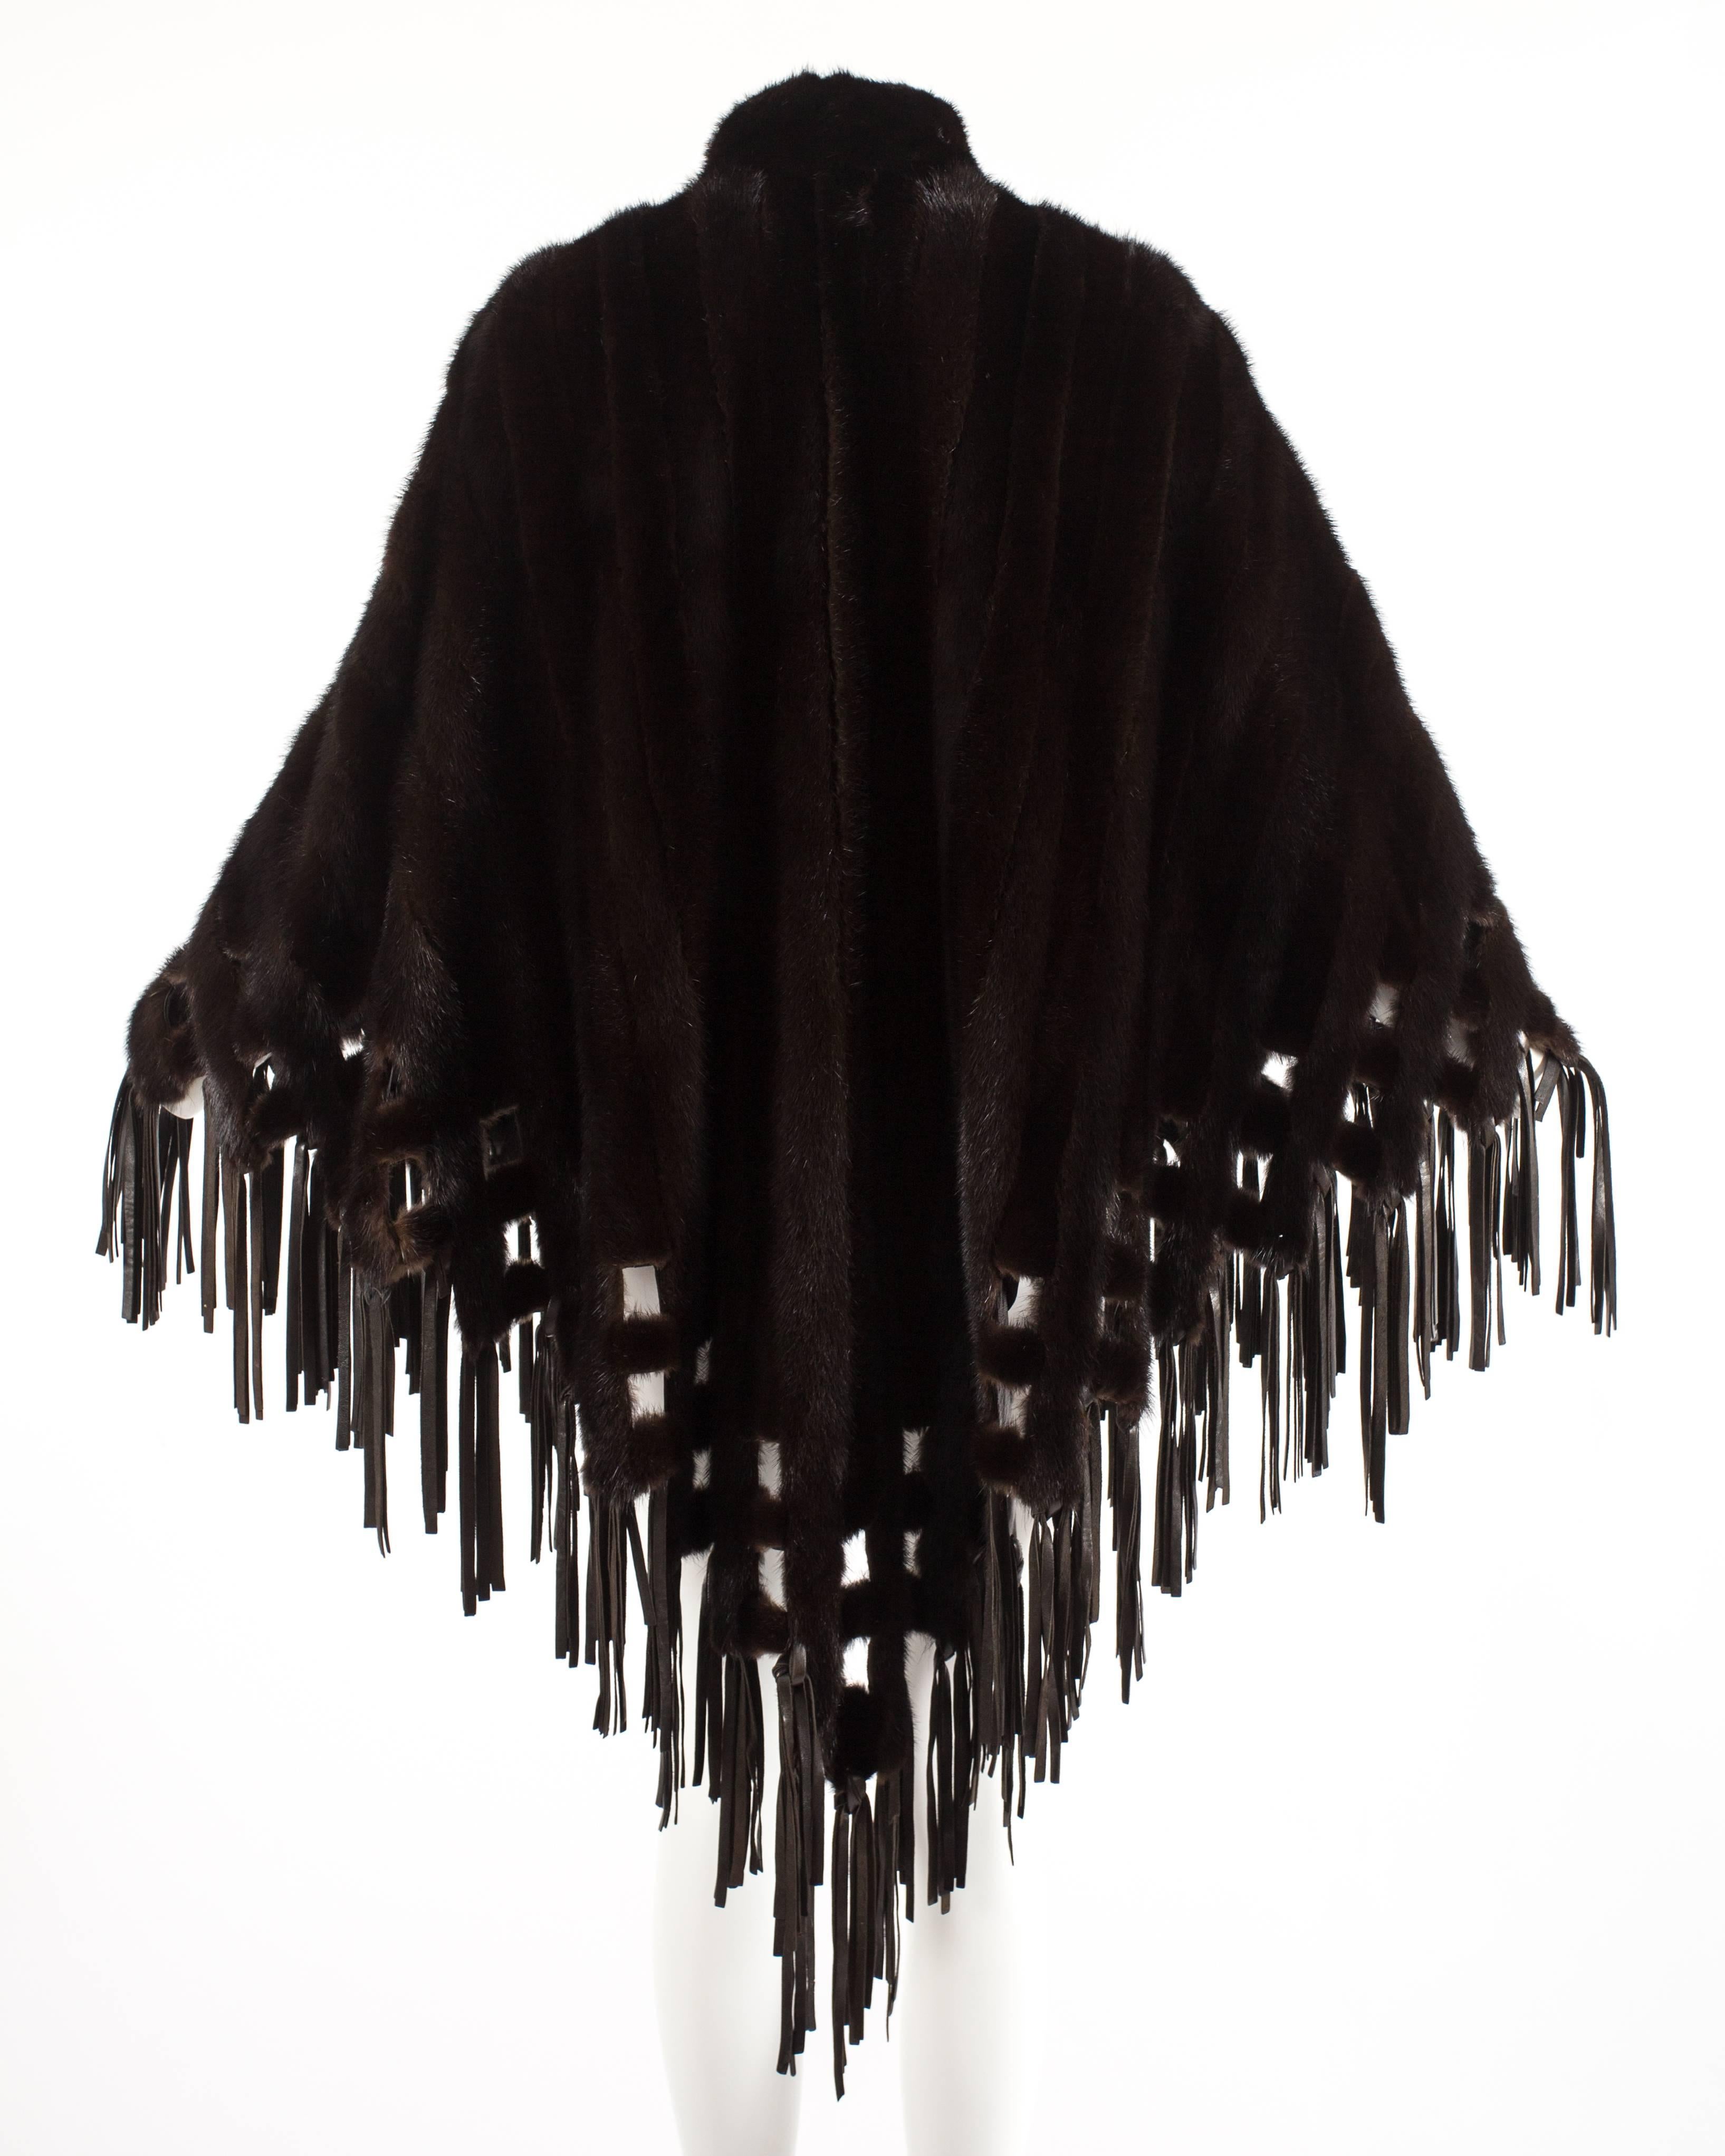 Christian Dior by Marc Bohan brown mink cape with leather tassels, c. 1970 In Excellent Condition For Sale In London, GB